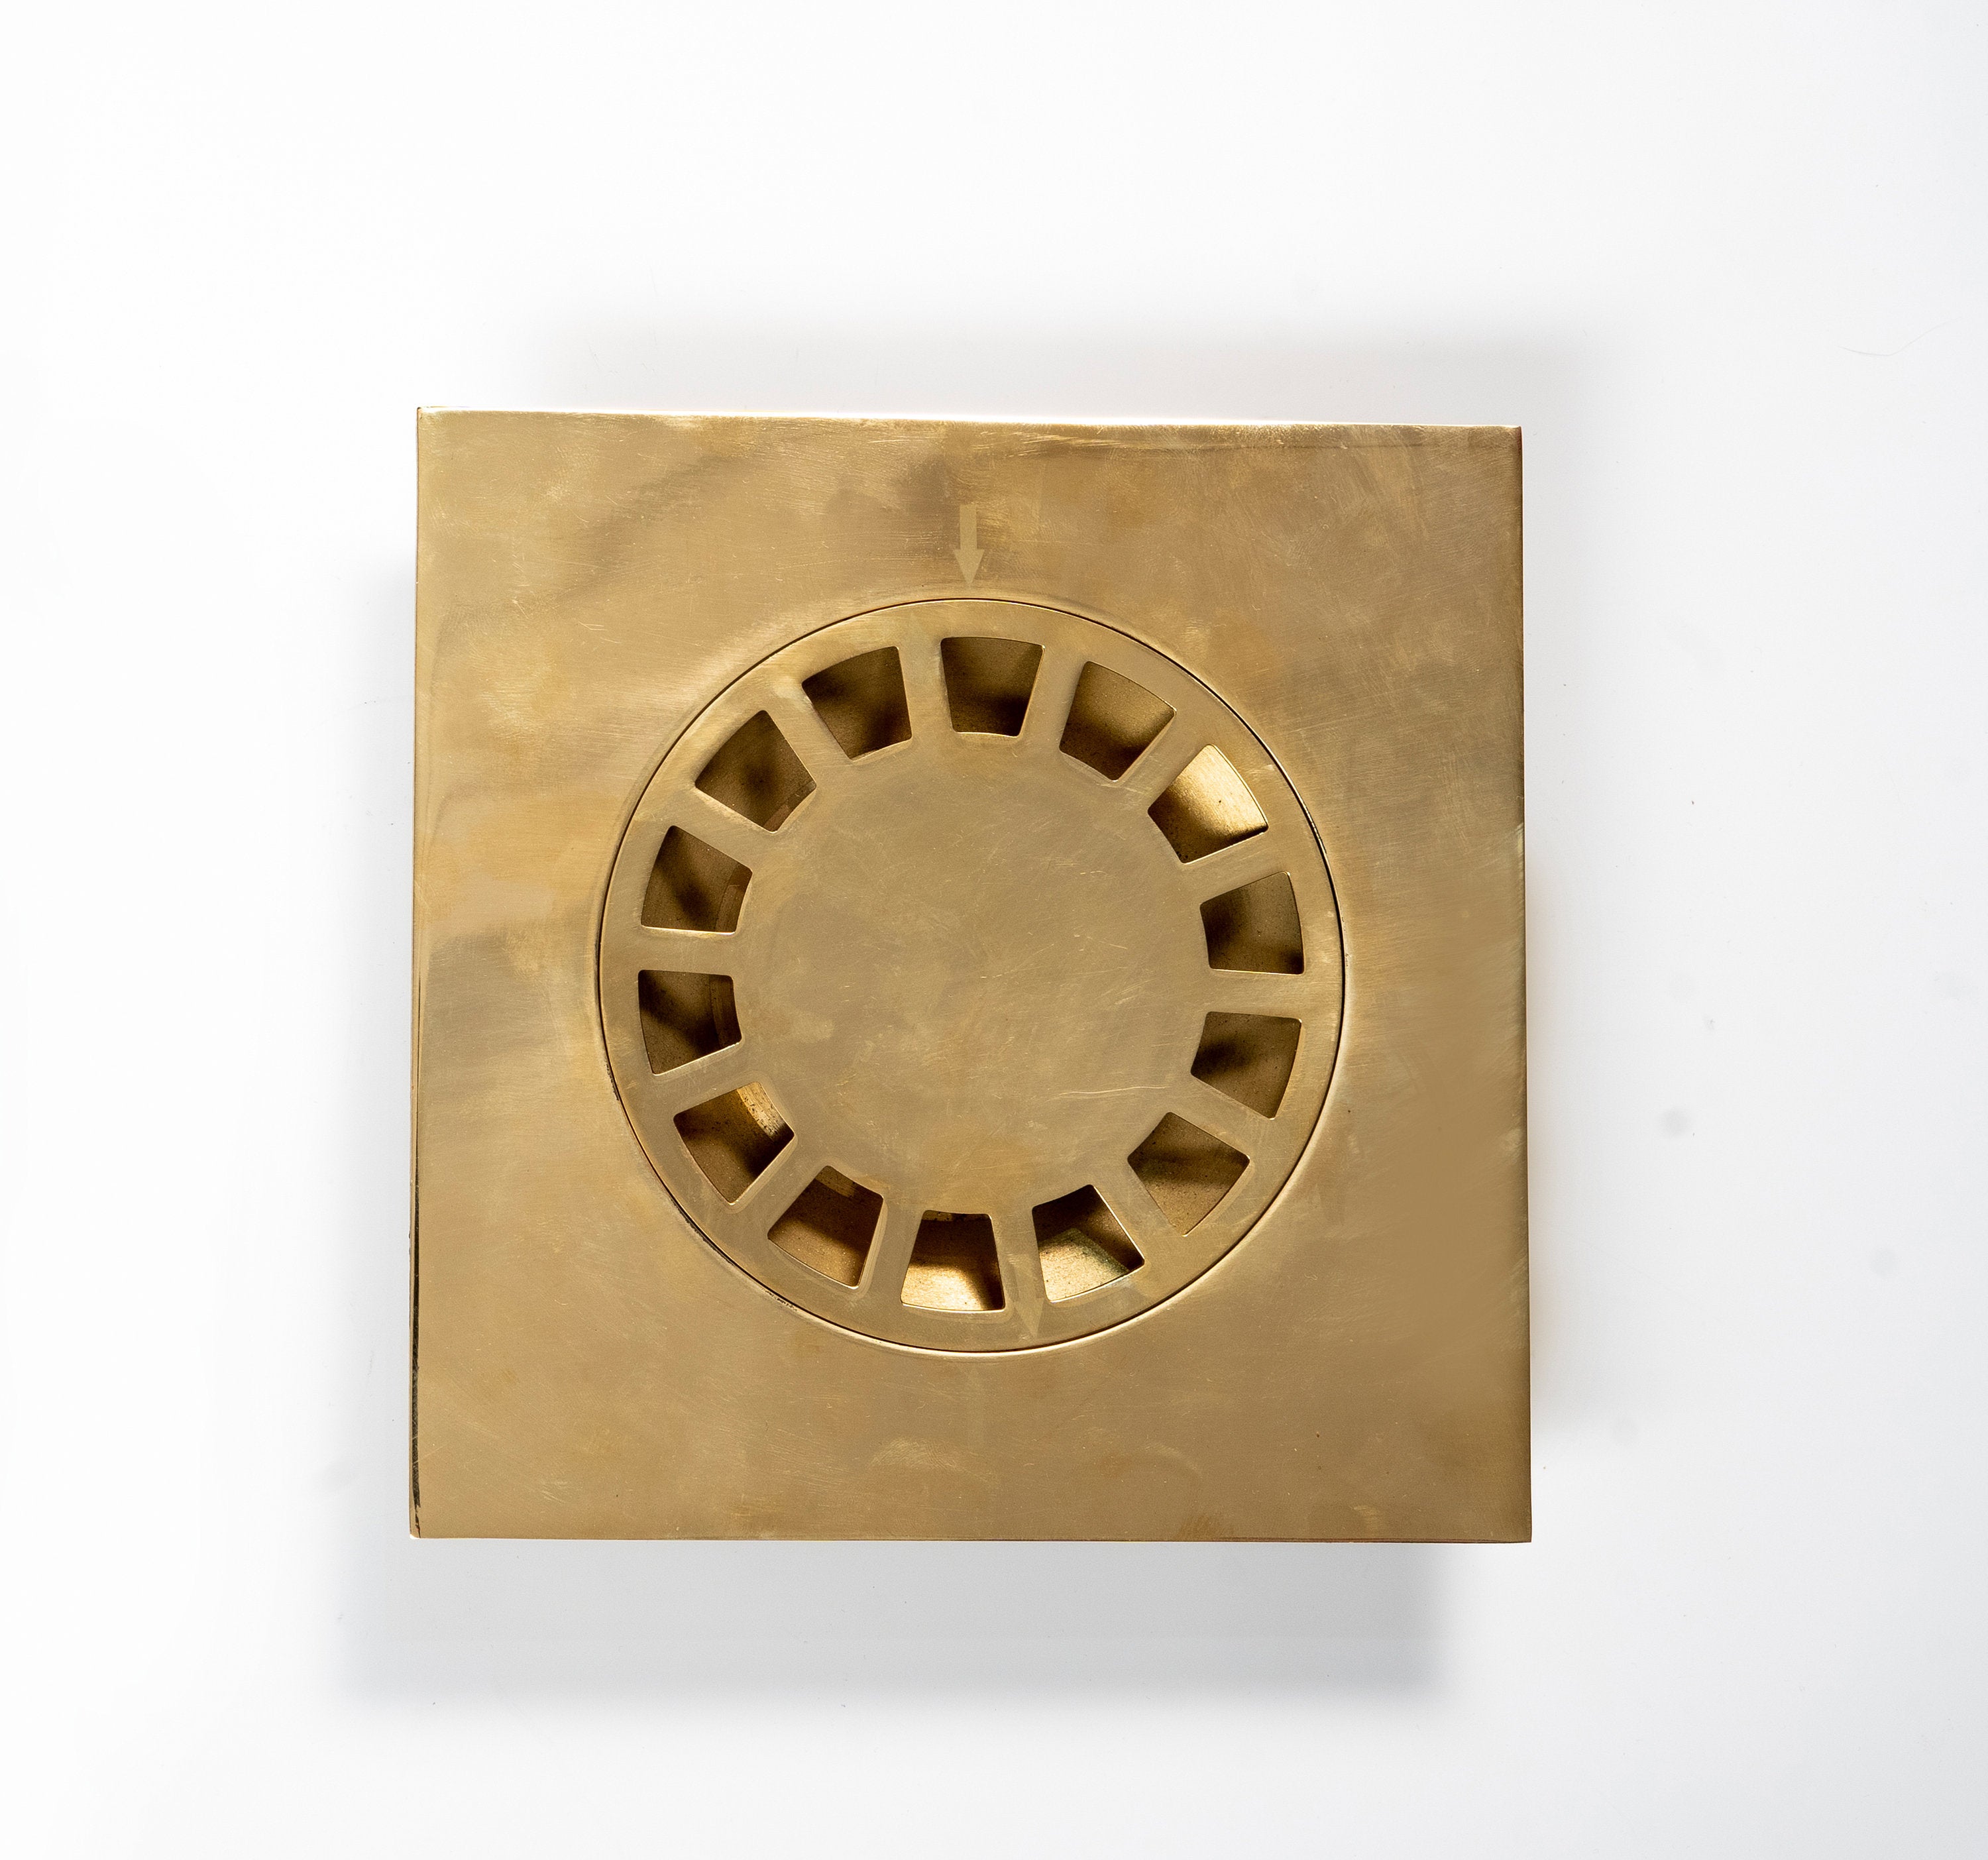 Unlacquered Solid Brass Floor Drain ,Antique Brass Square Shower Drain with Removable Cover